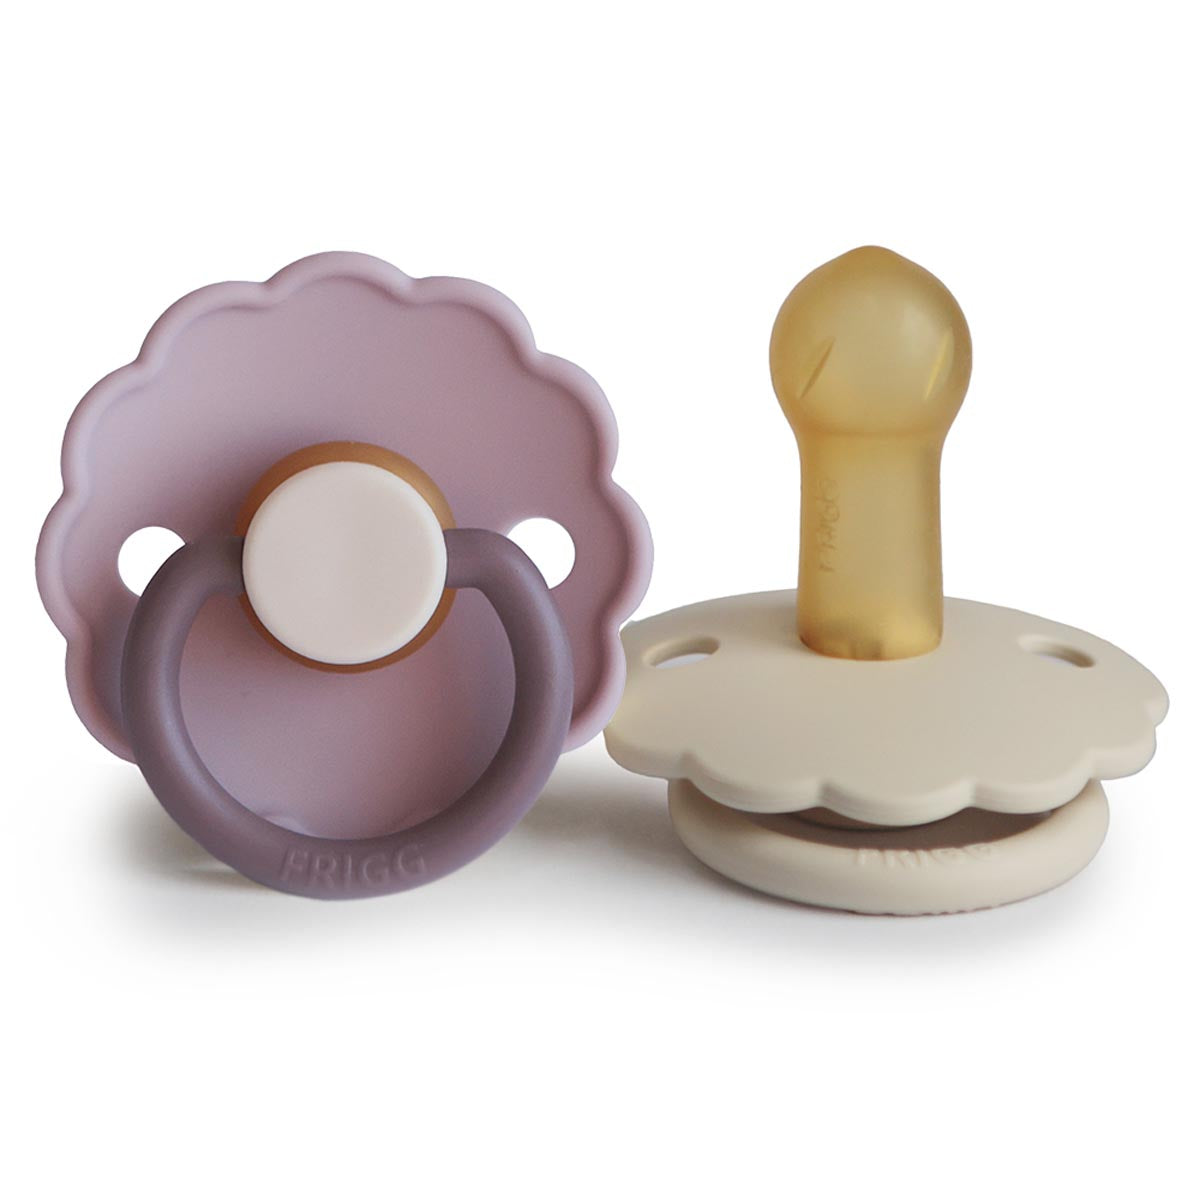 FRIGG Daisy Pacifier 2 Pack Latex